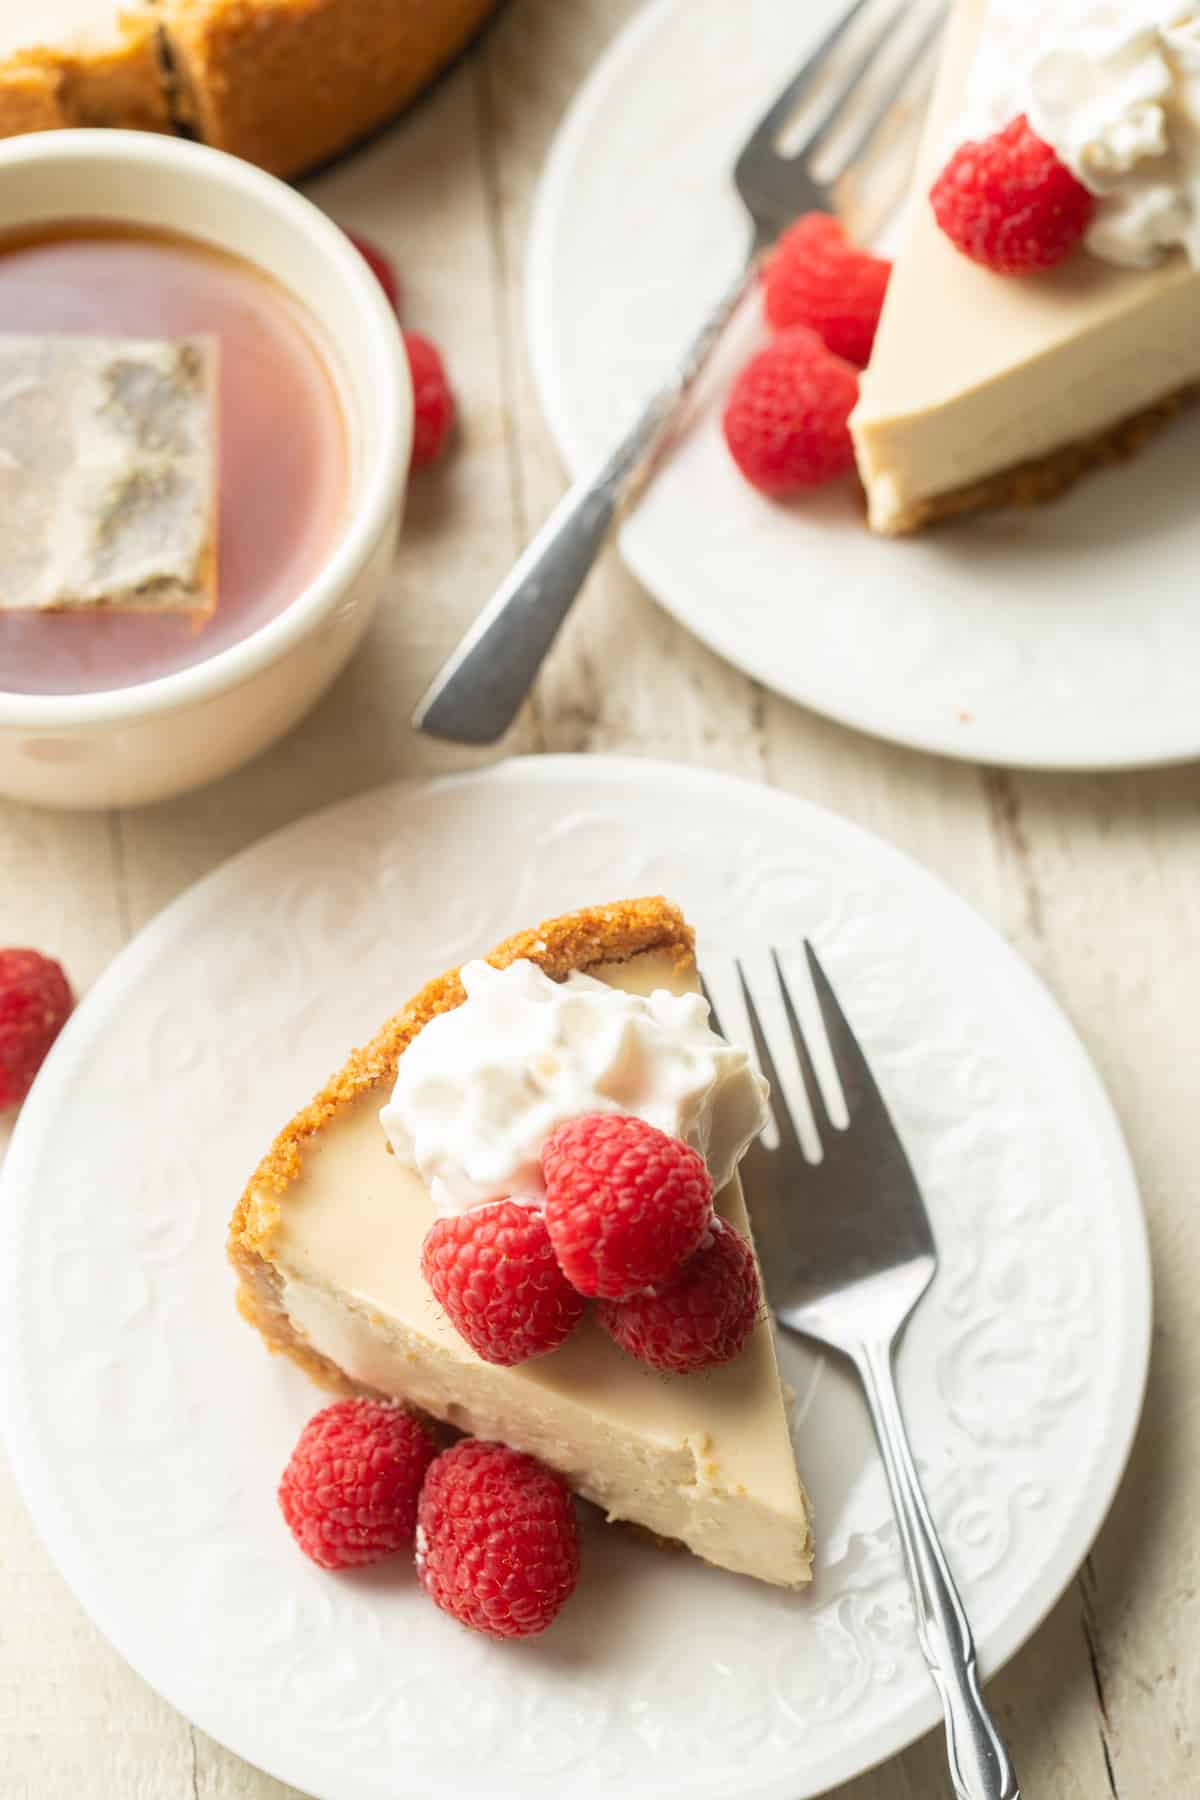 White wooden surface set with tea cup and two slices of Vegan Cheesecake on plates.